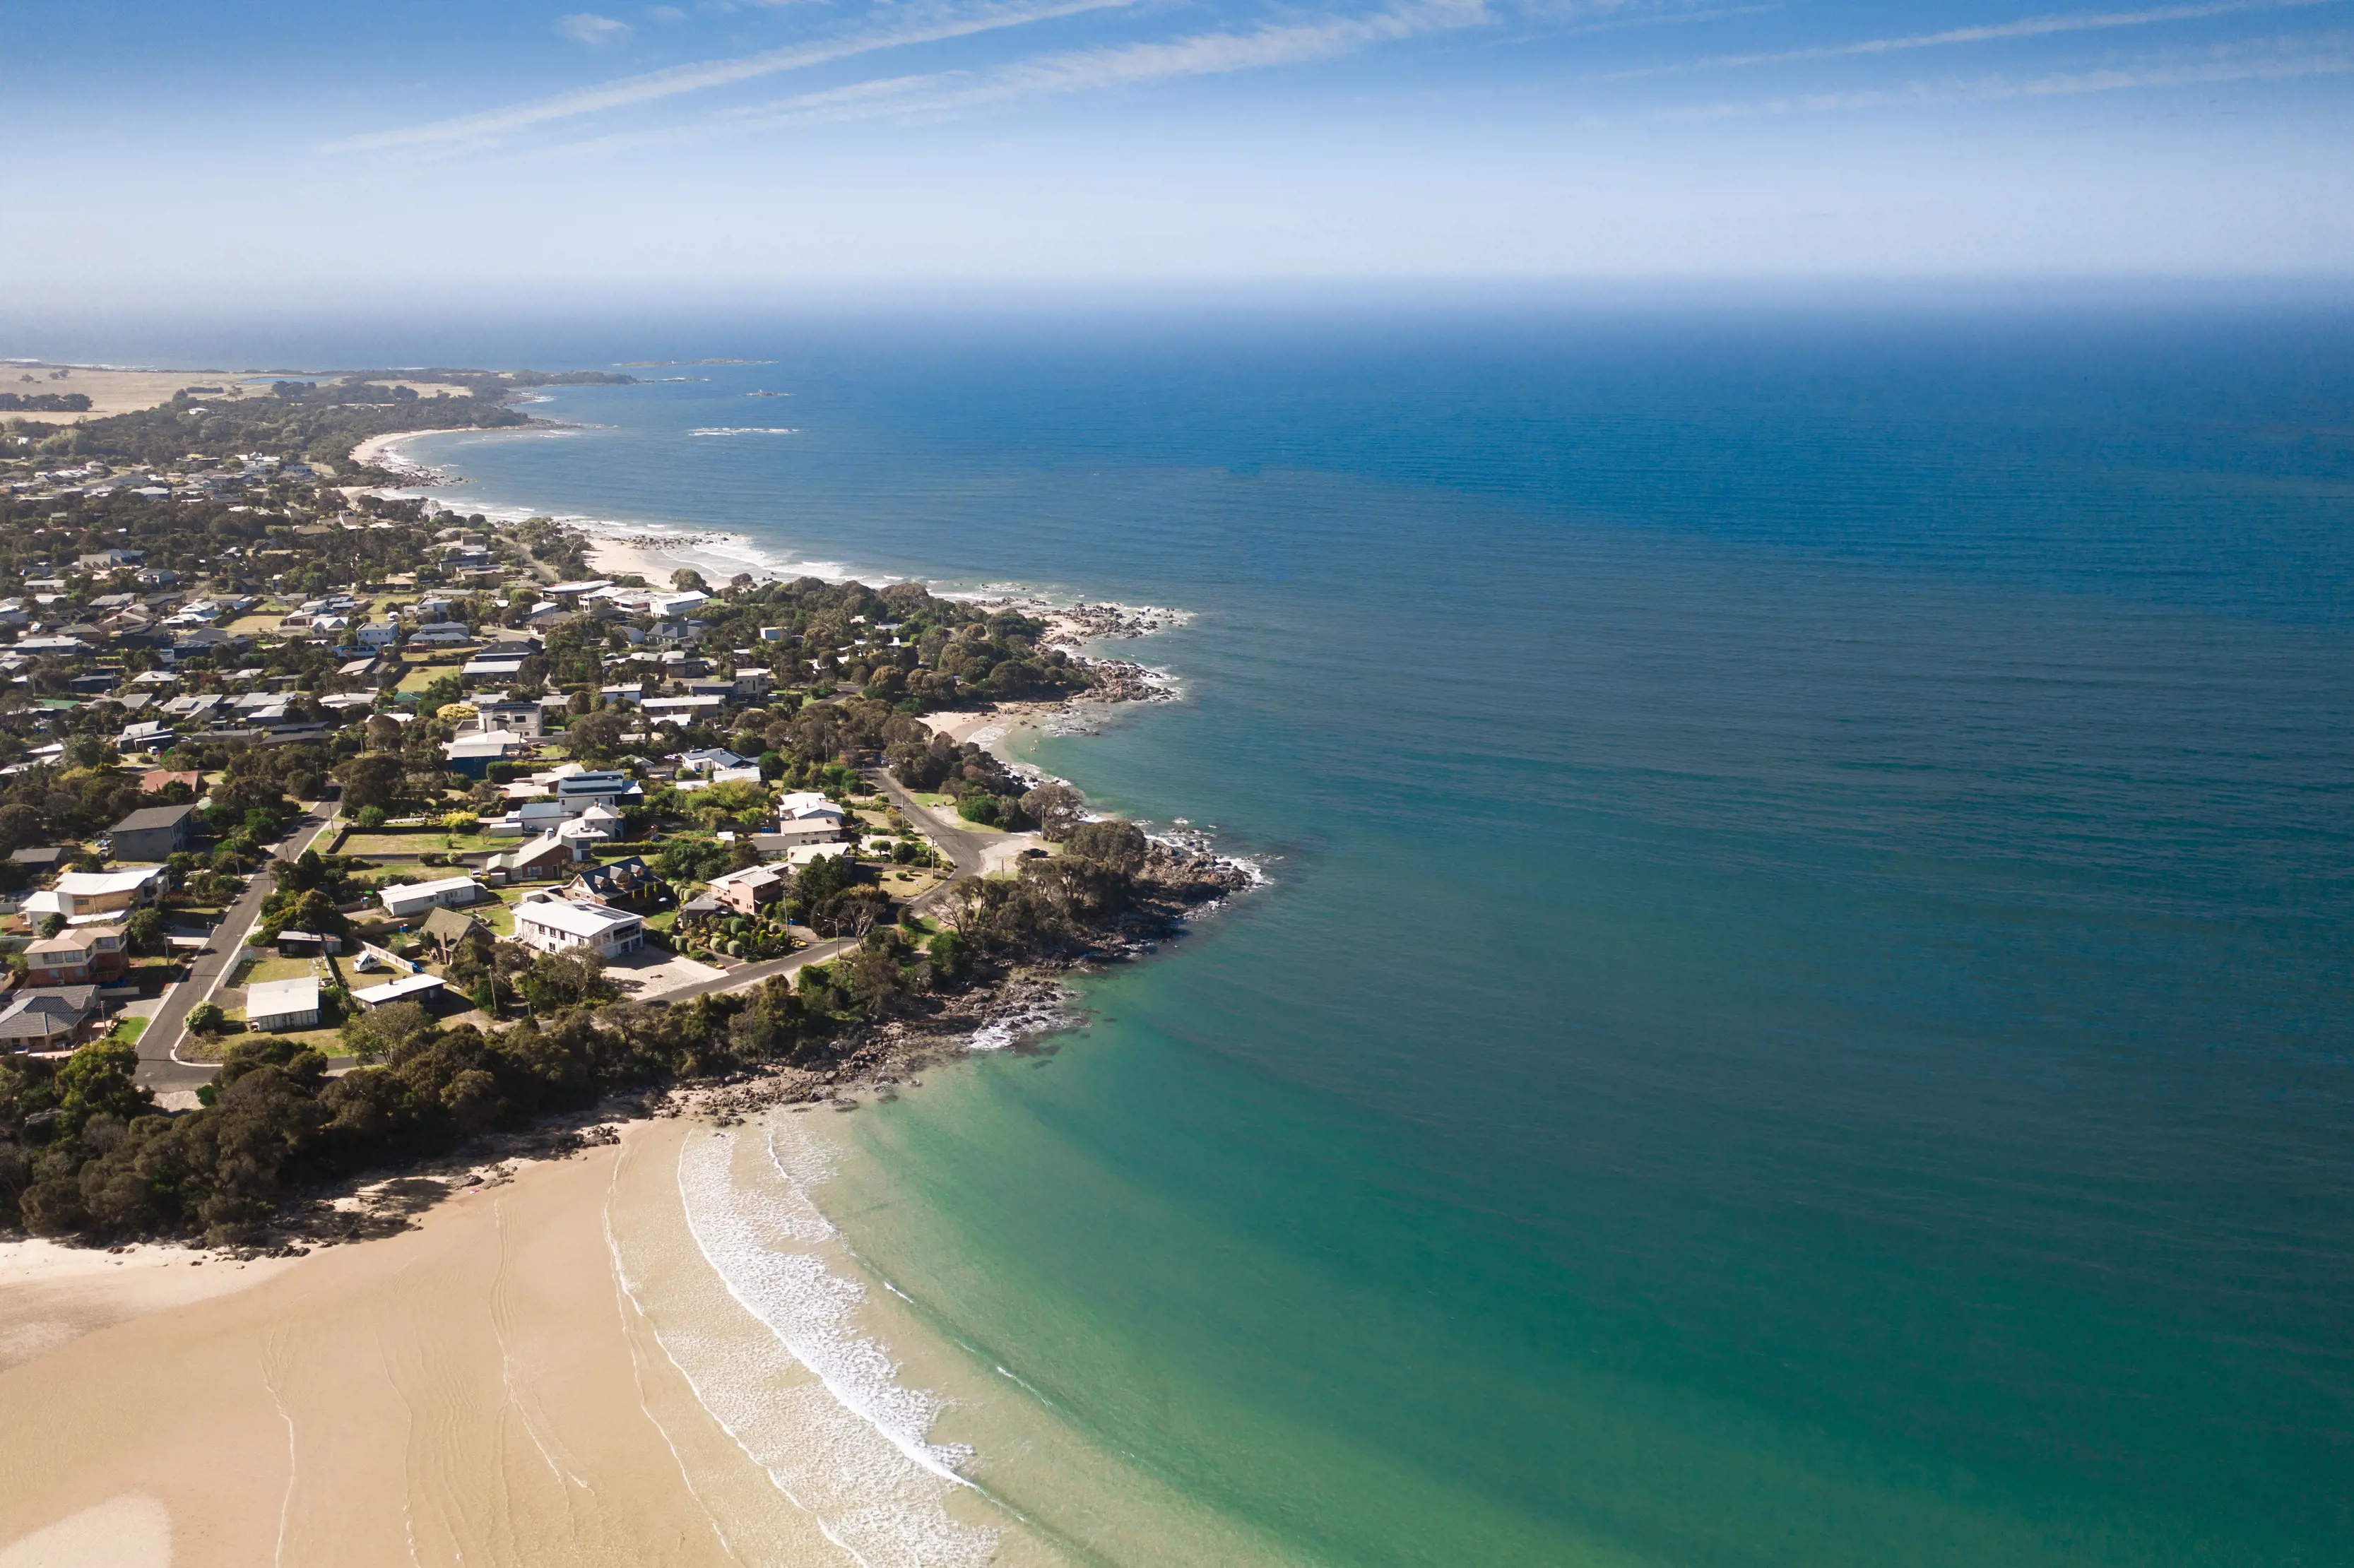 Stunning birds eye view image of Freers and Hawley Beach on a clear, sunny day.